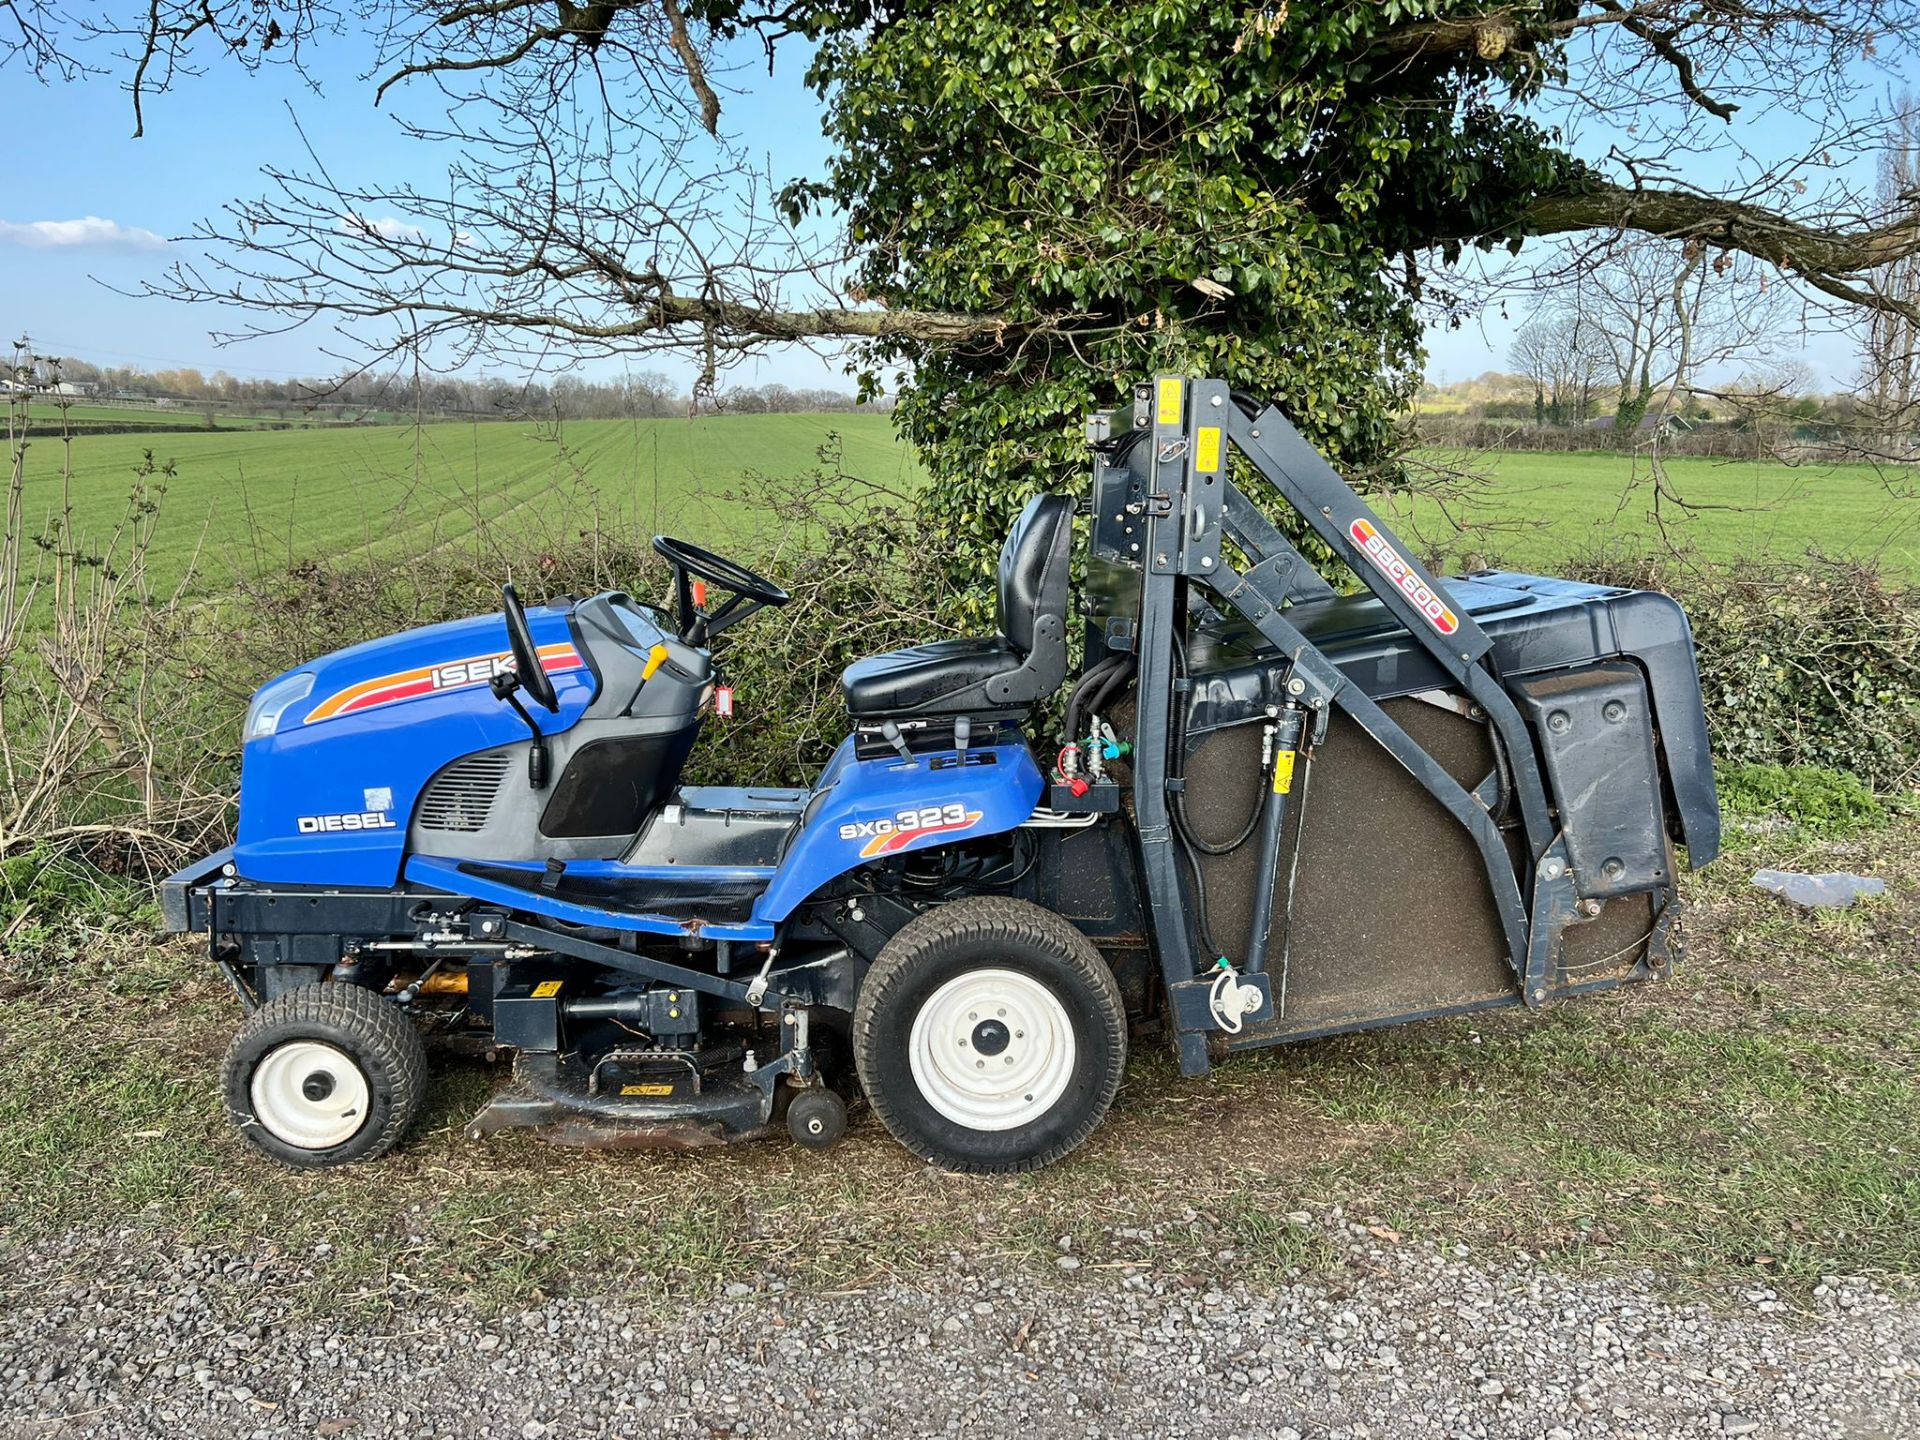 2012 Iseki SXG323 Diesel High Tip Ride On Mower, Runs Drives Cuts And Collects *PLUS VAT* - Image 3 of 15